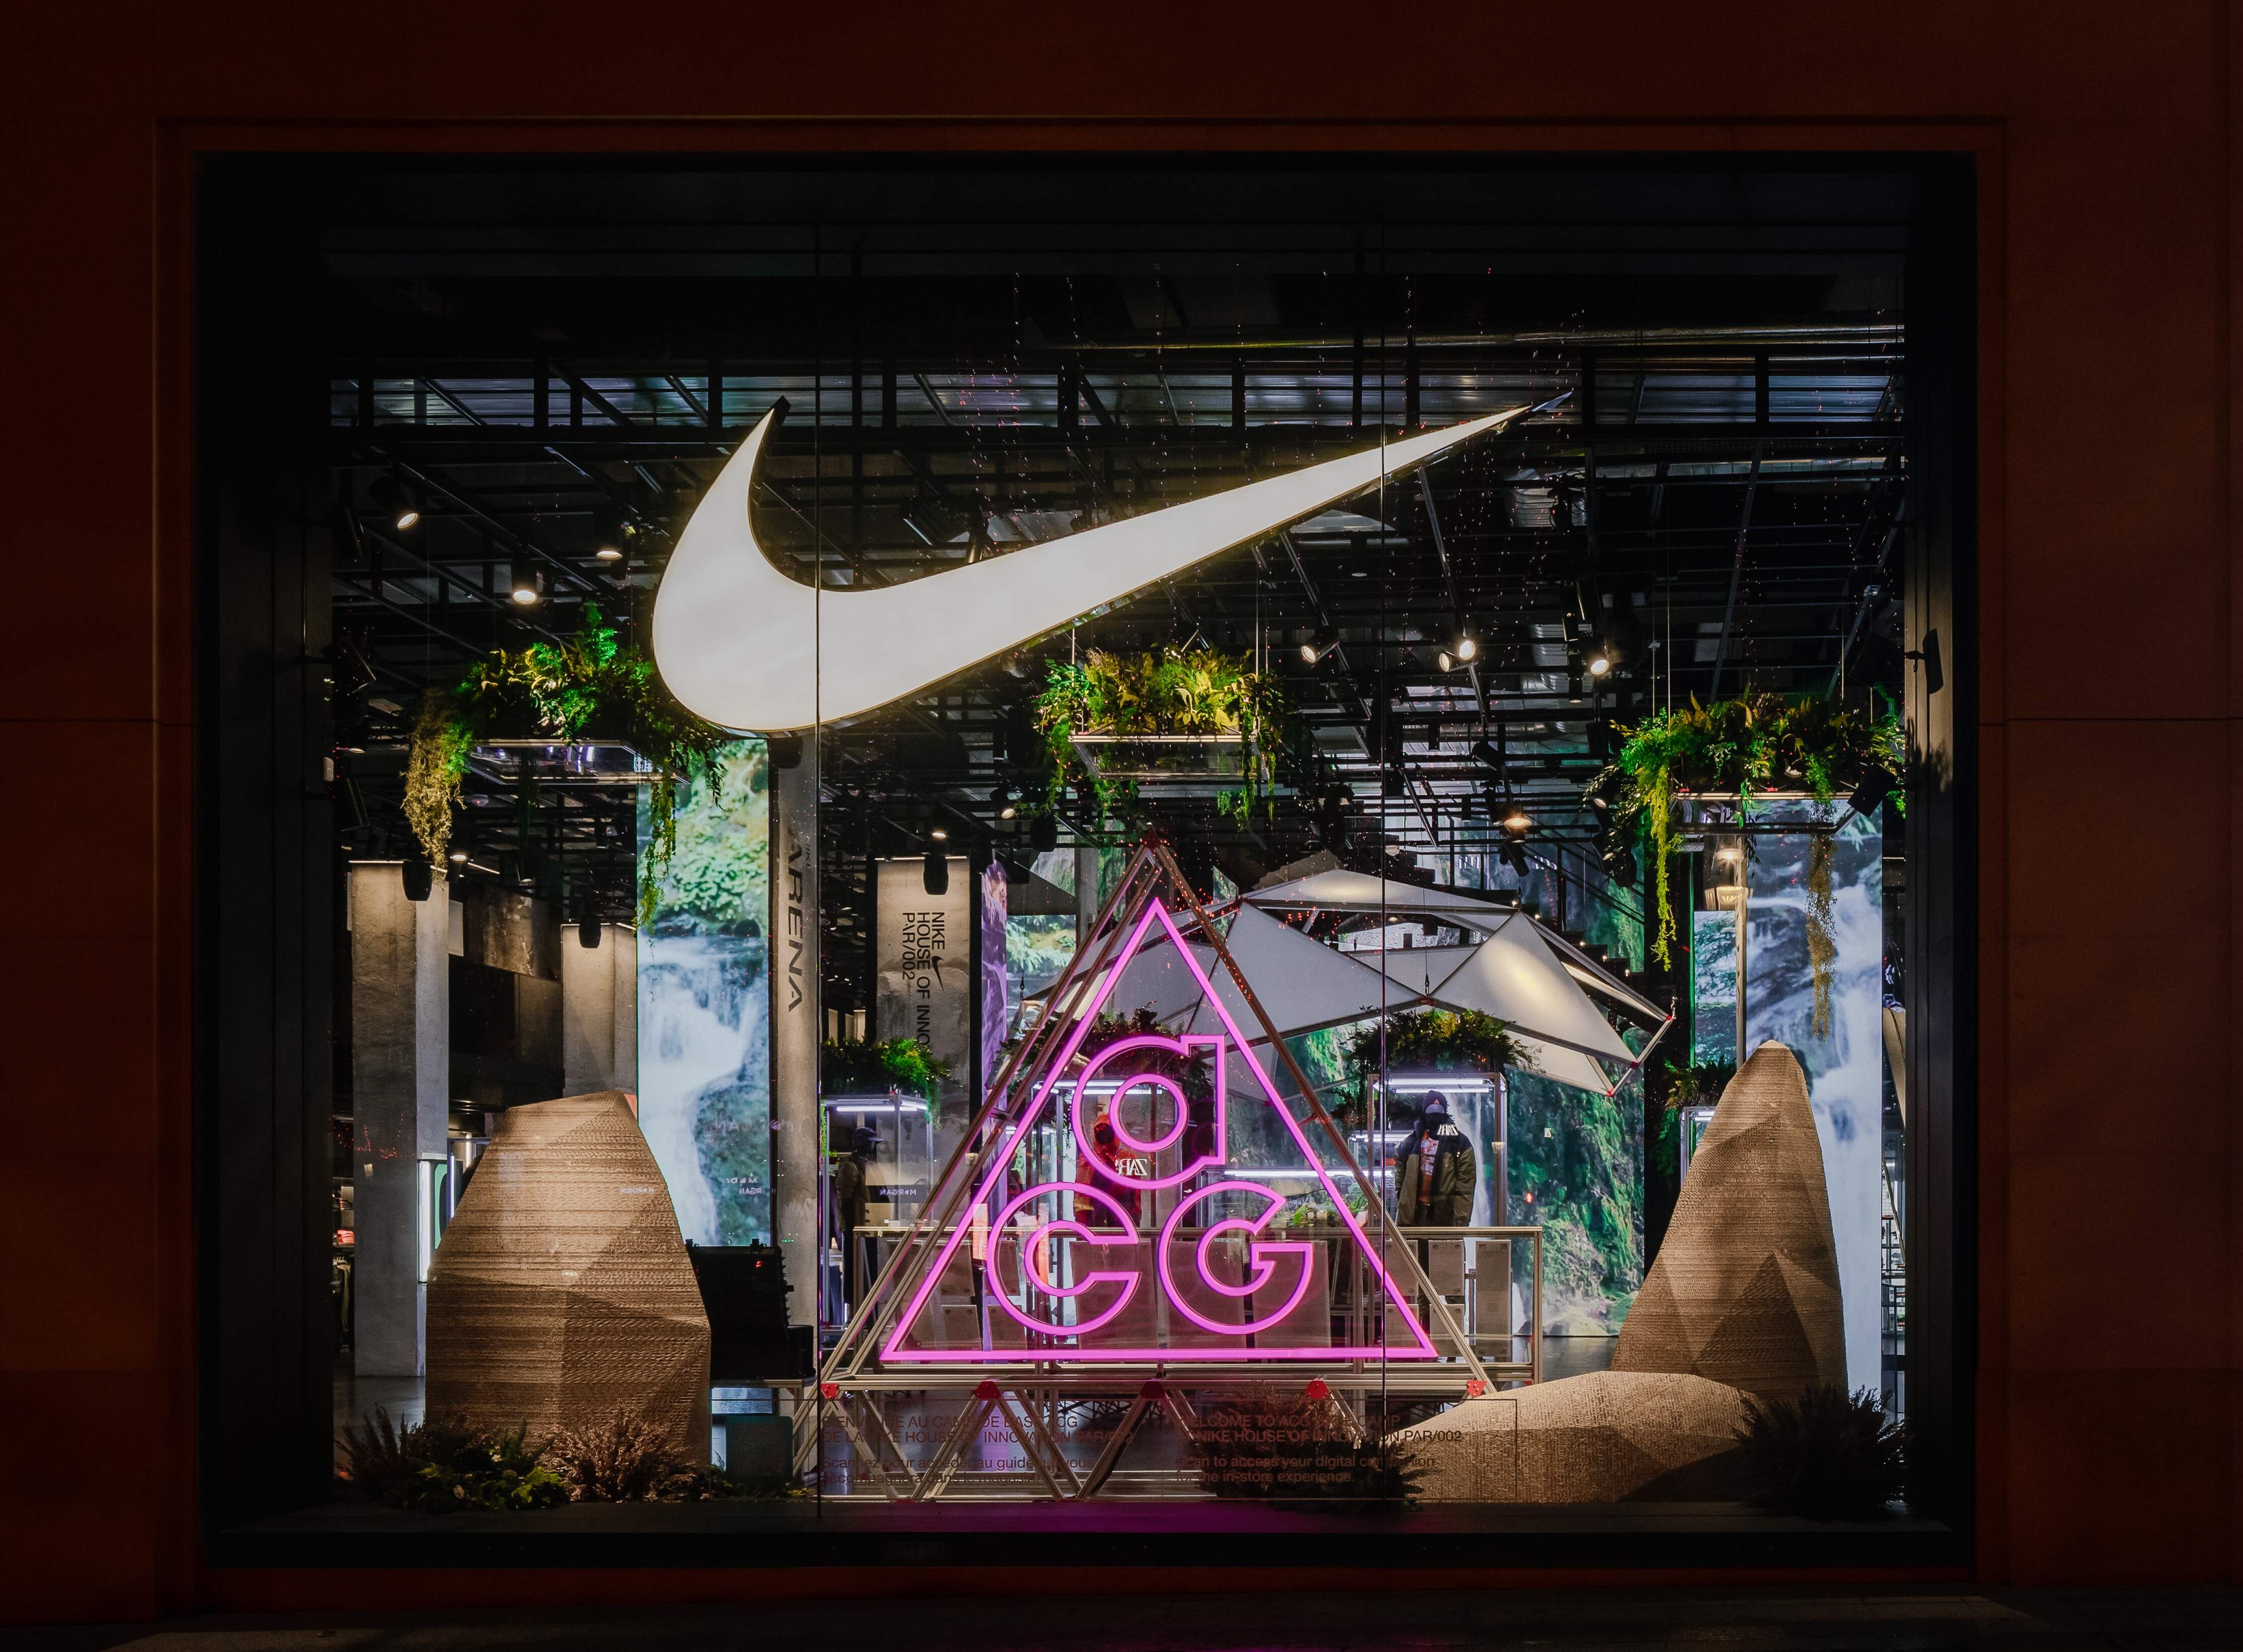 Coca intelectual Jabón New campaigns at Nike House of Innovation - News - satis&fy